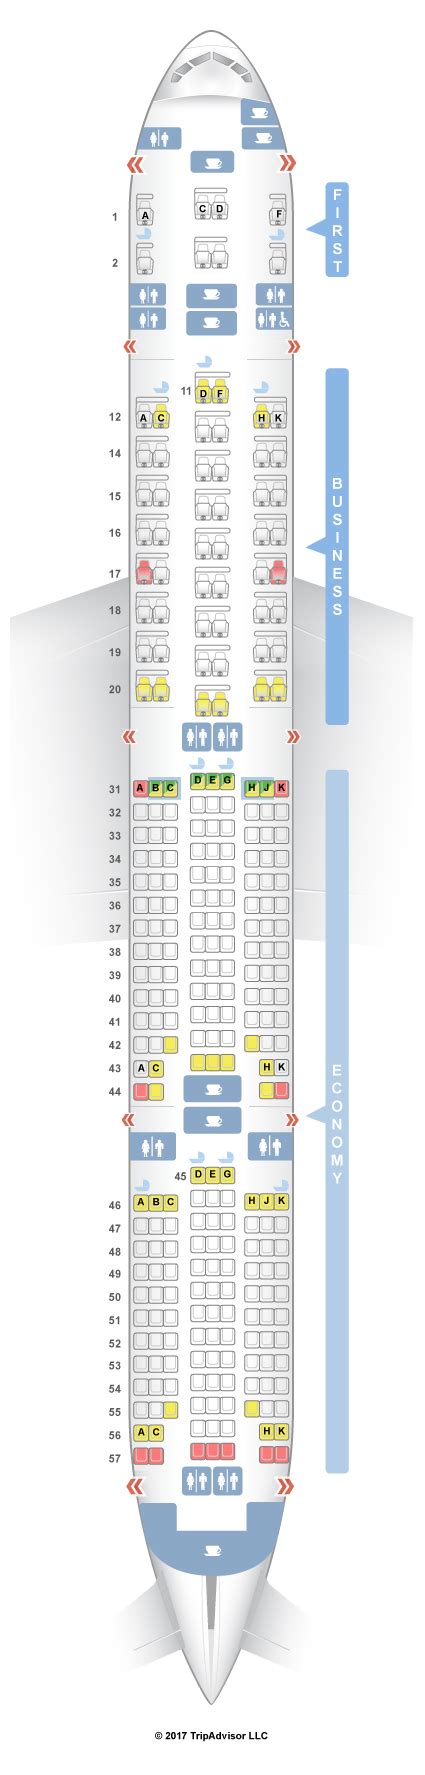 singapore airlines boeing 777-300 seat map